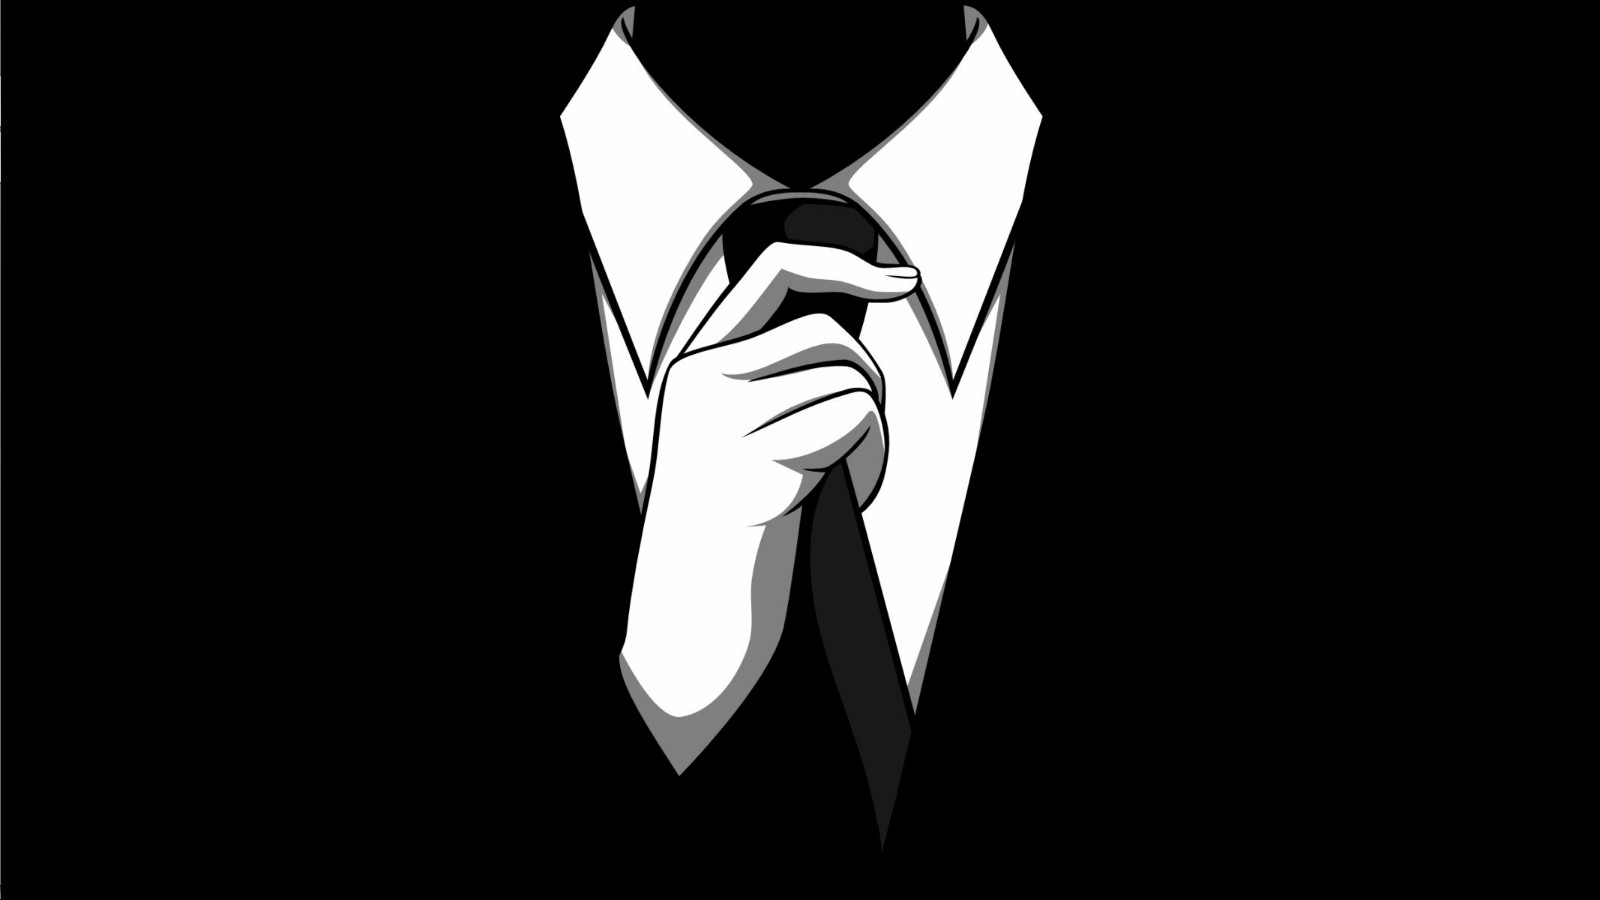 Anonymous Black Background Wallpaper Full HD 